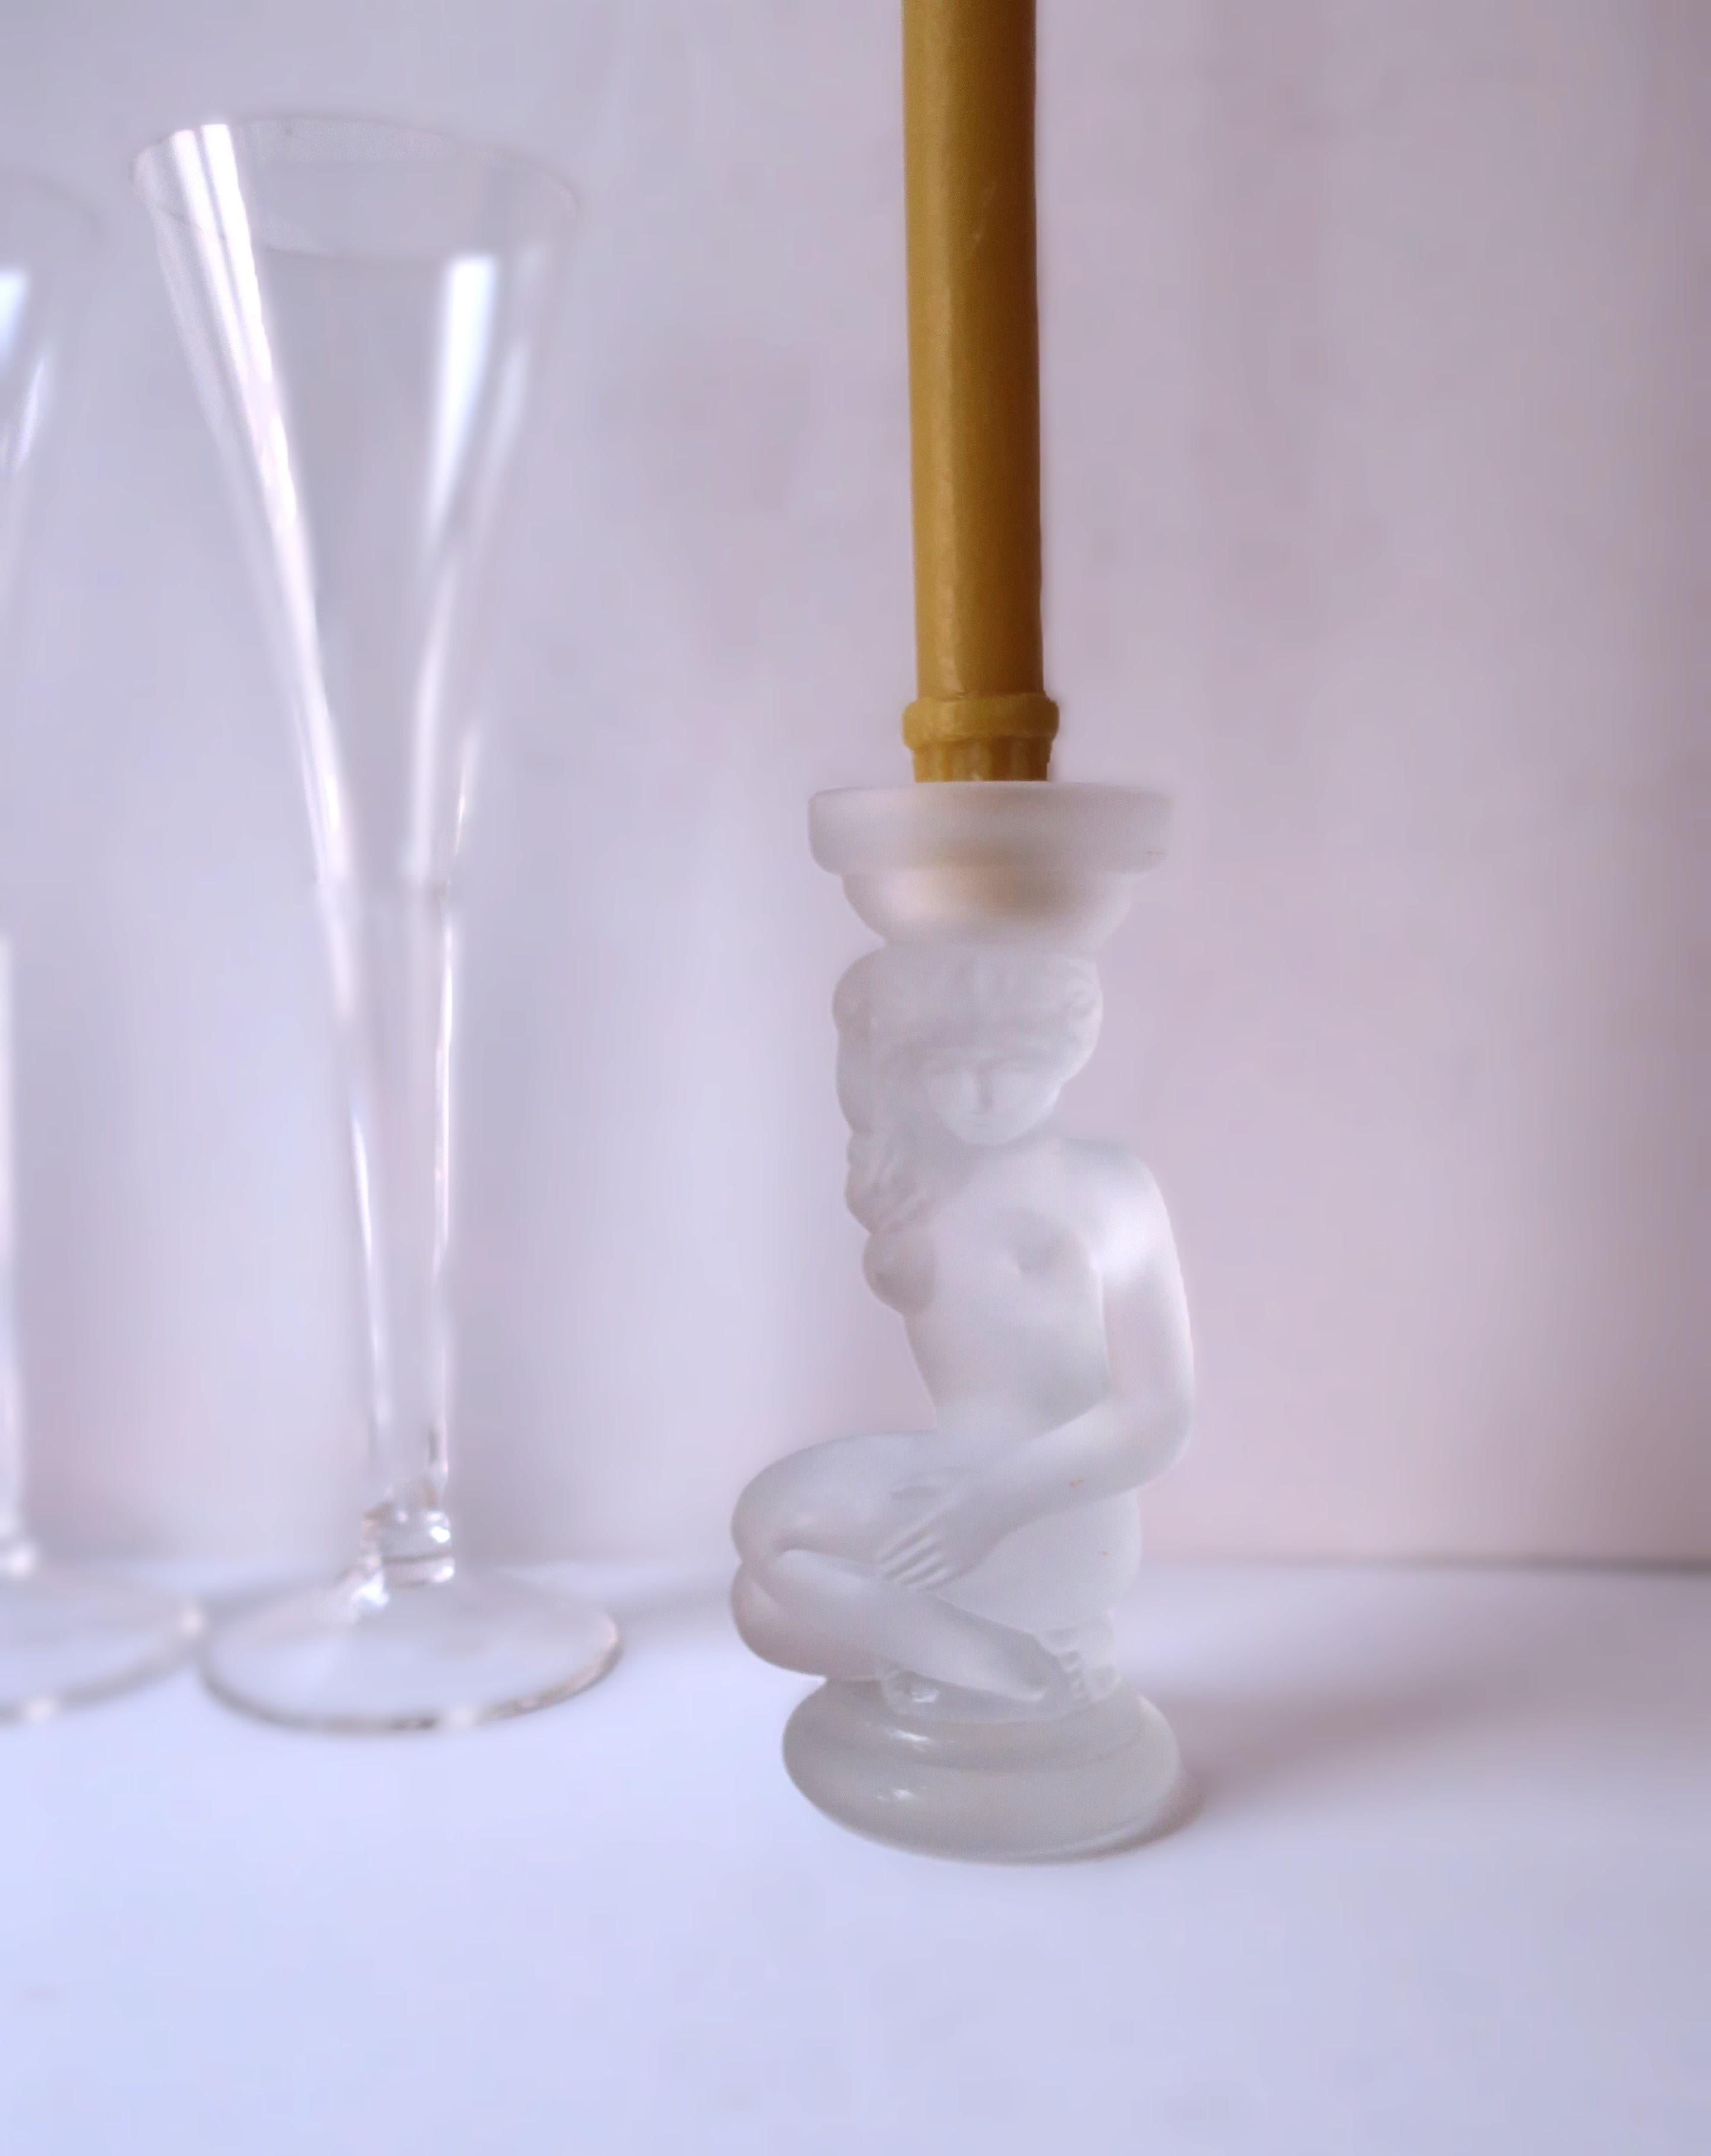 Female Figurative Sculpture Candlestick Holder styled after Lalique Art Nouveau In Excellent Condition For Sale In New York, NY